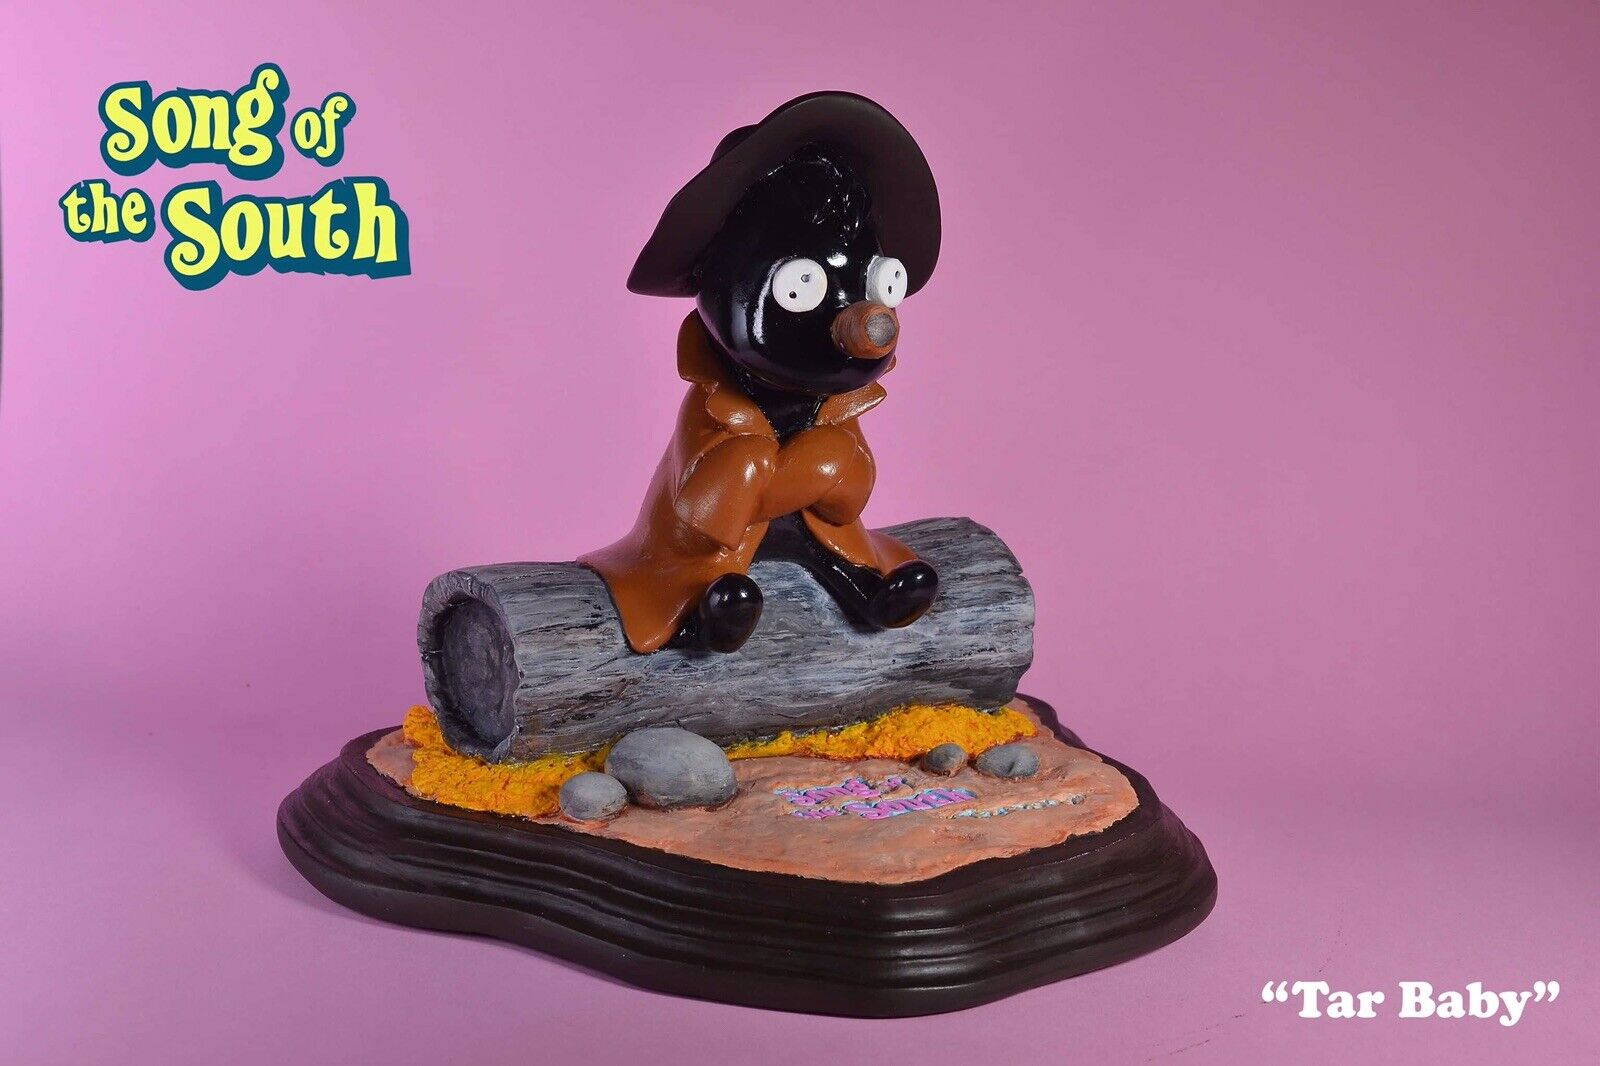 UBER RARE WONDERFUL UNIQUE AMAZING DISNEY SONG OF THE SOUTH TAR BABY SCULPTURE